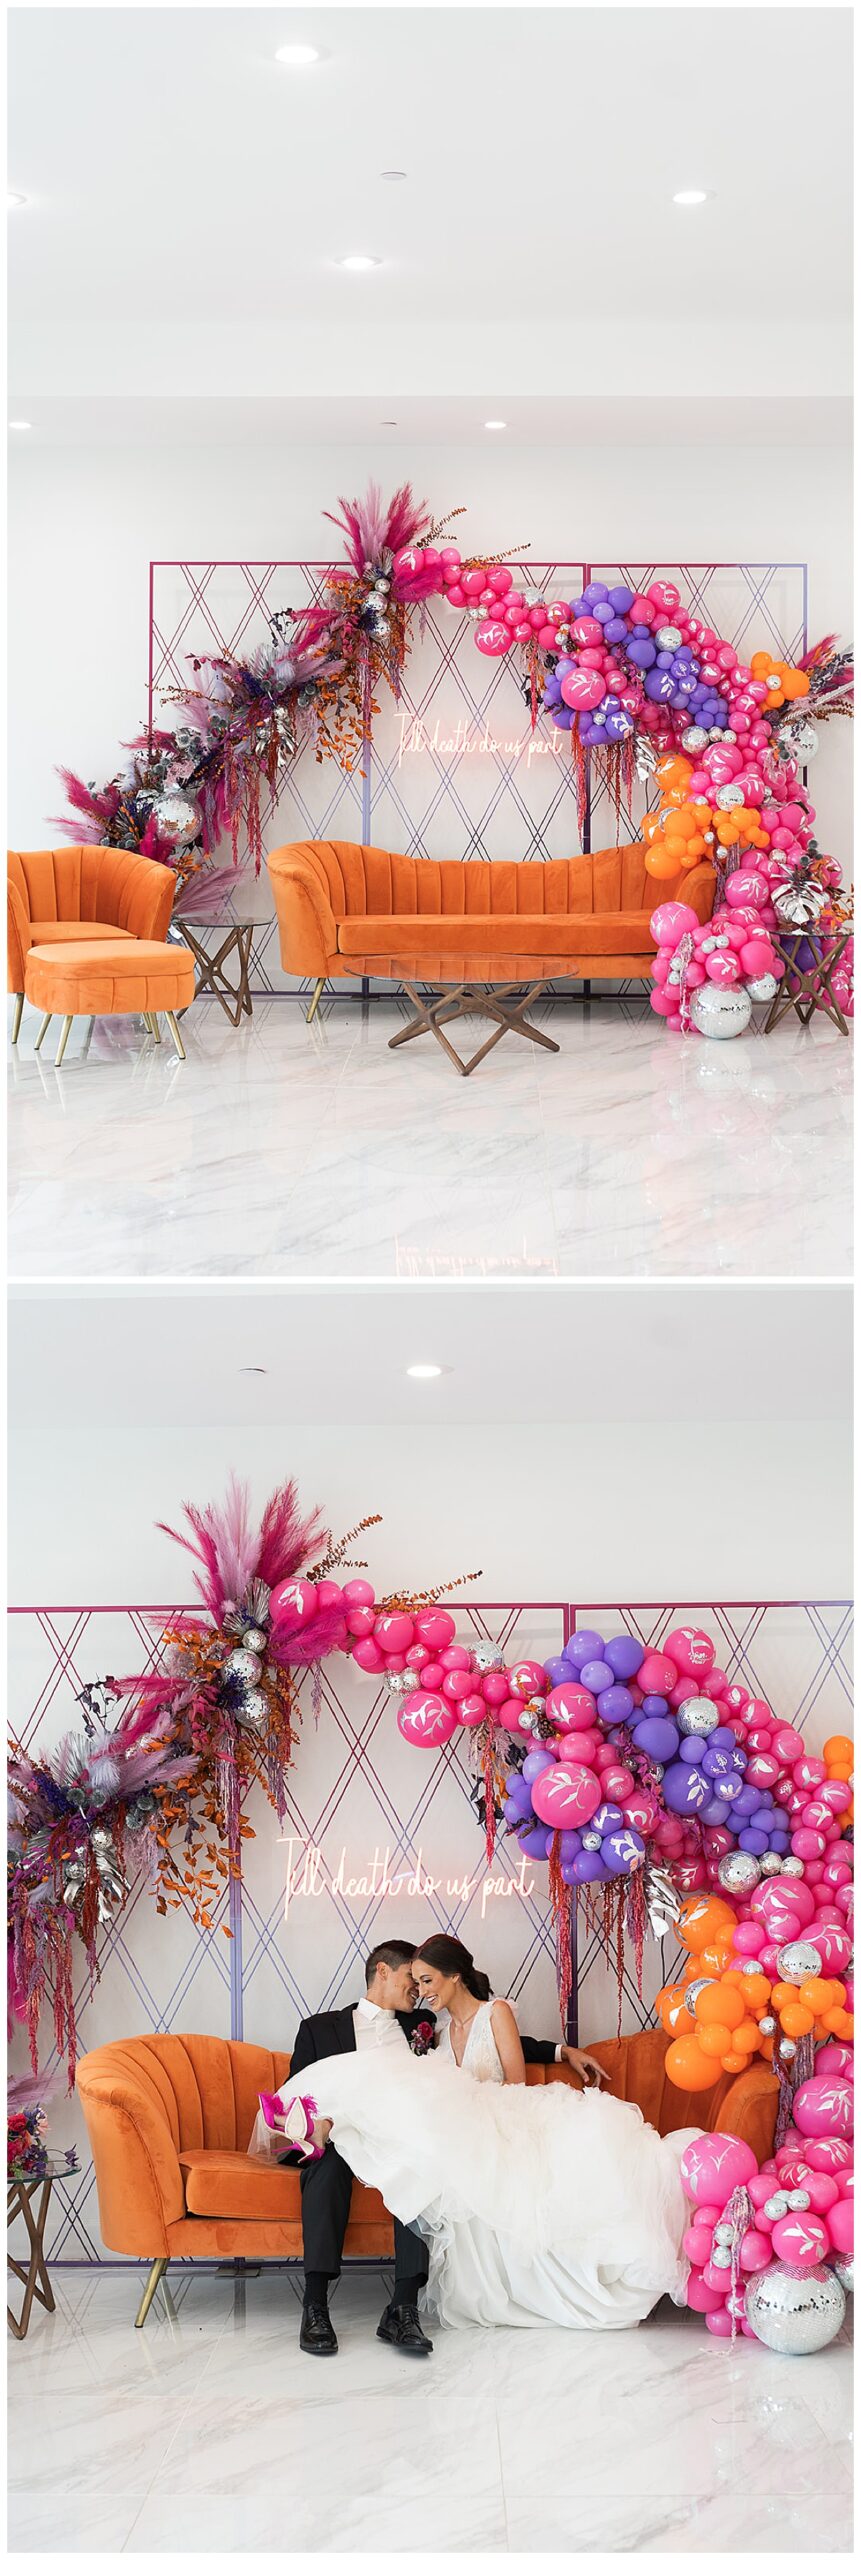 Couple sit together on bright orange couch surrounded by colorful floral installations and decor at The Homestead